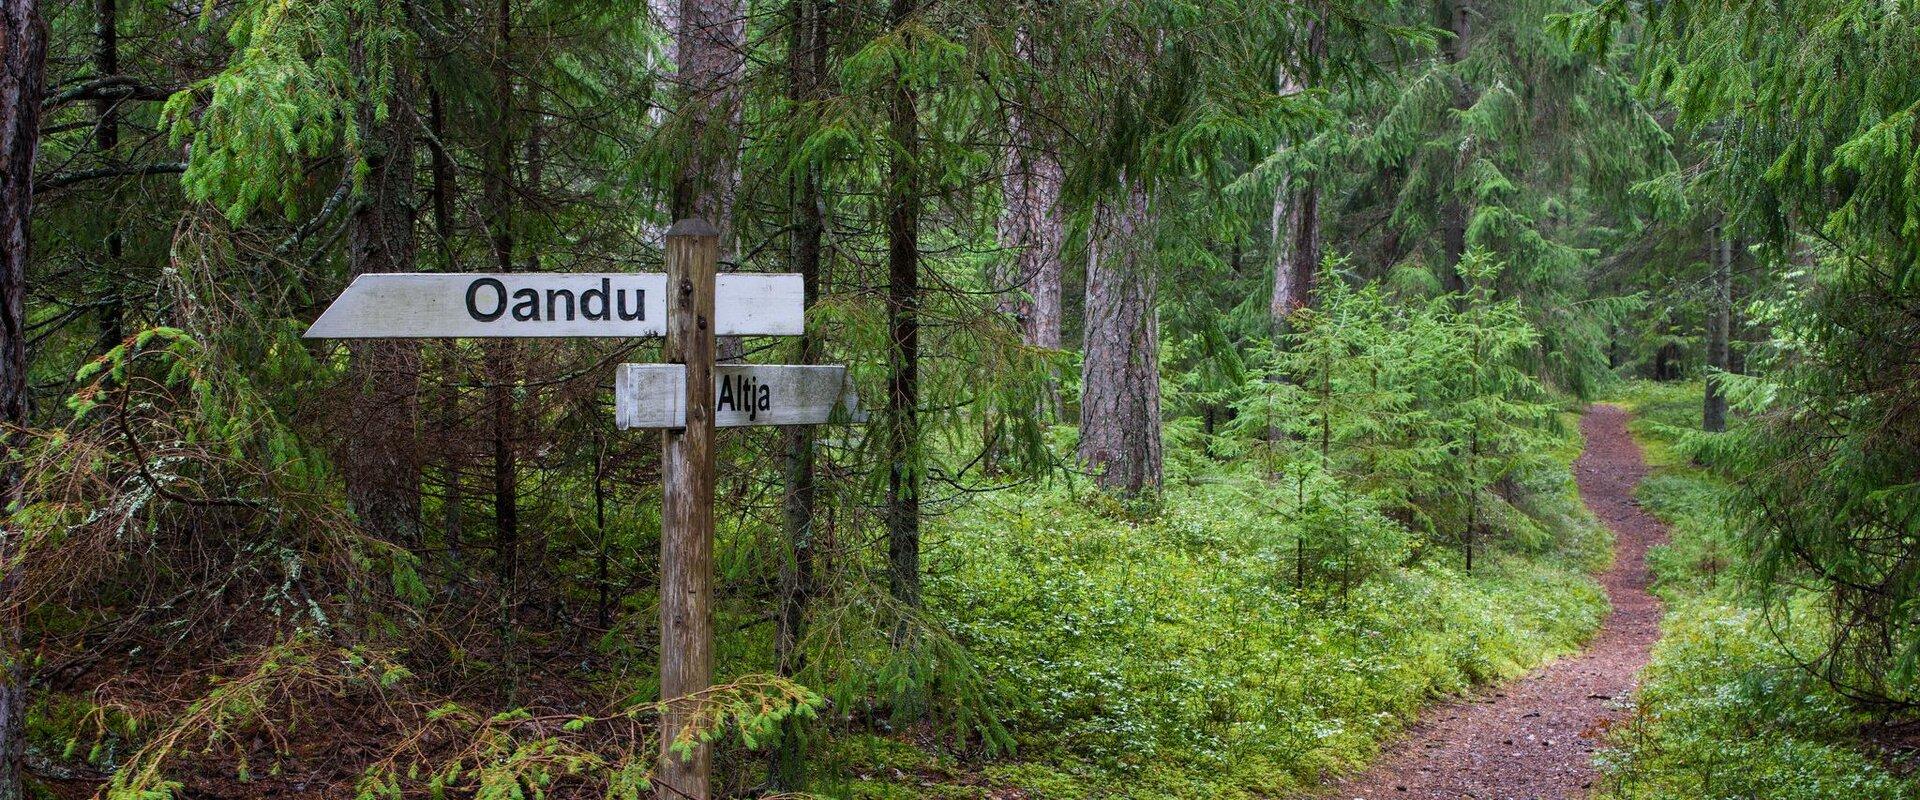 The Oandu-Võsu hiking trail is situated in Lahemaa National Park and is 9.5 km long. It begins at the Oandu camping area and continues through to the 